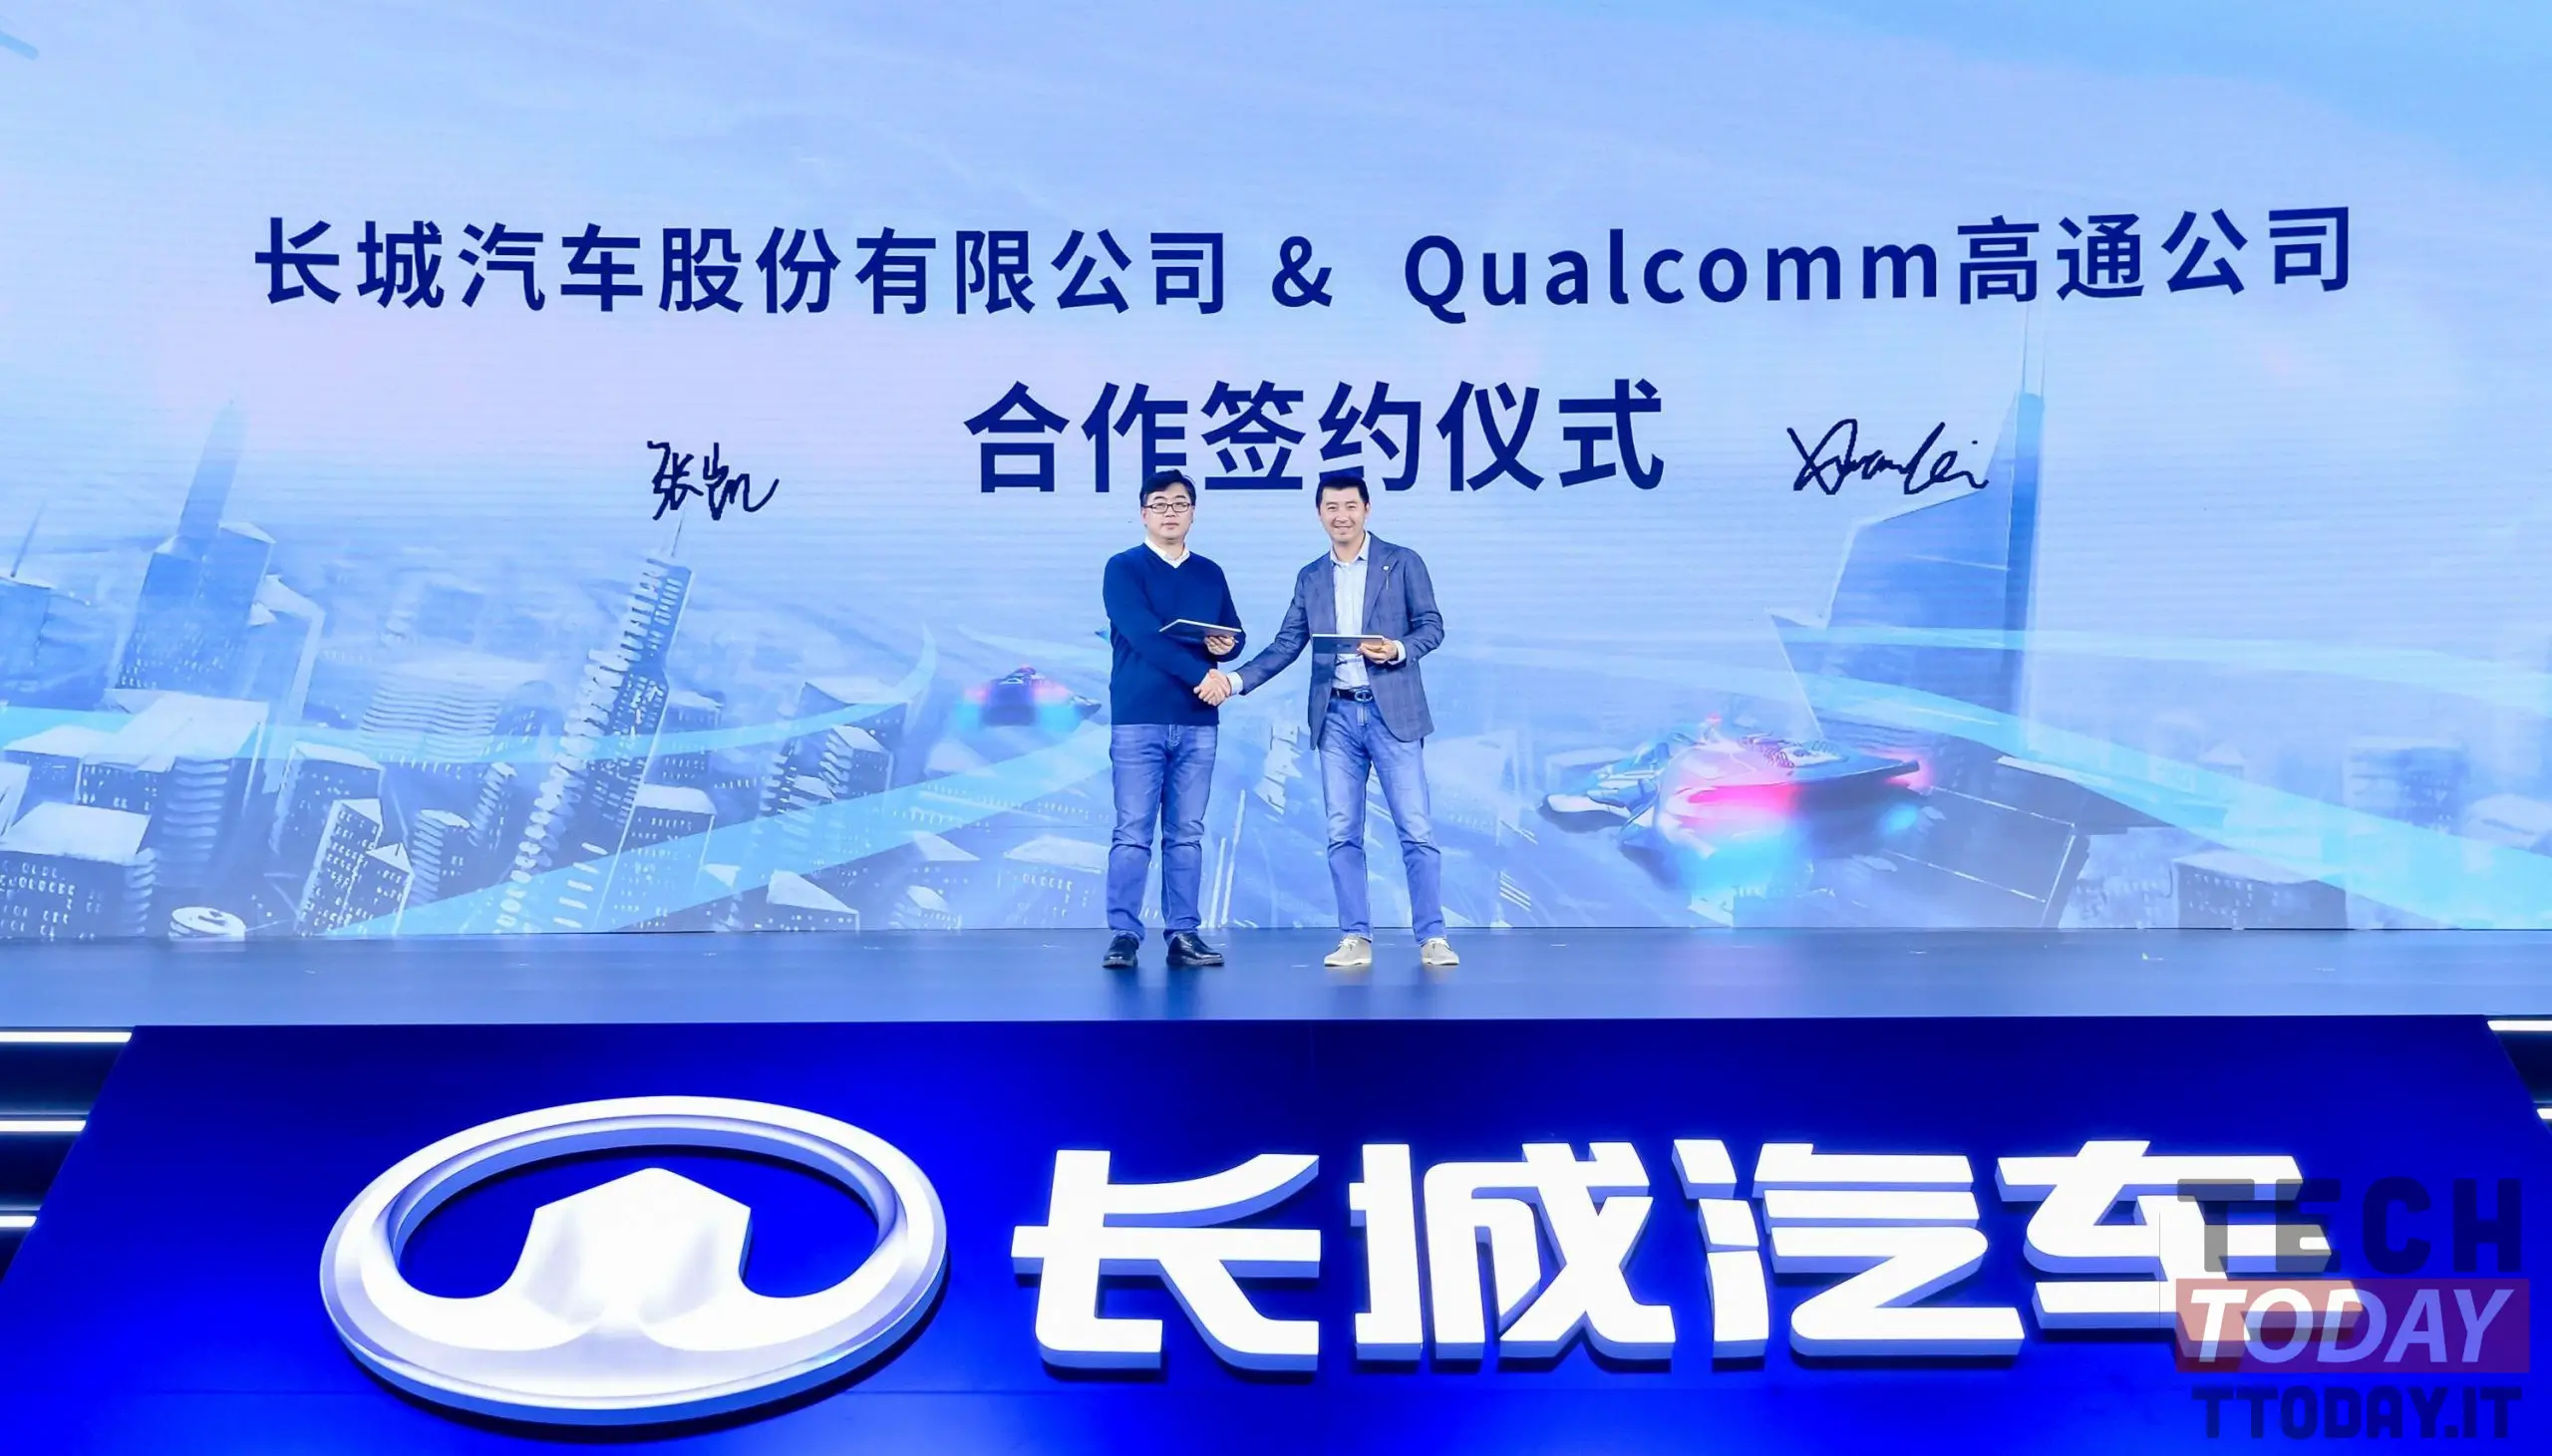 Qualcomm partners with Great Wall Motors to make cars even smarter